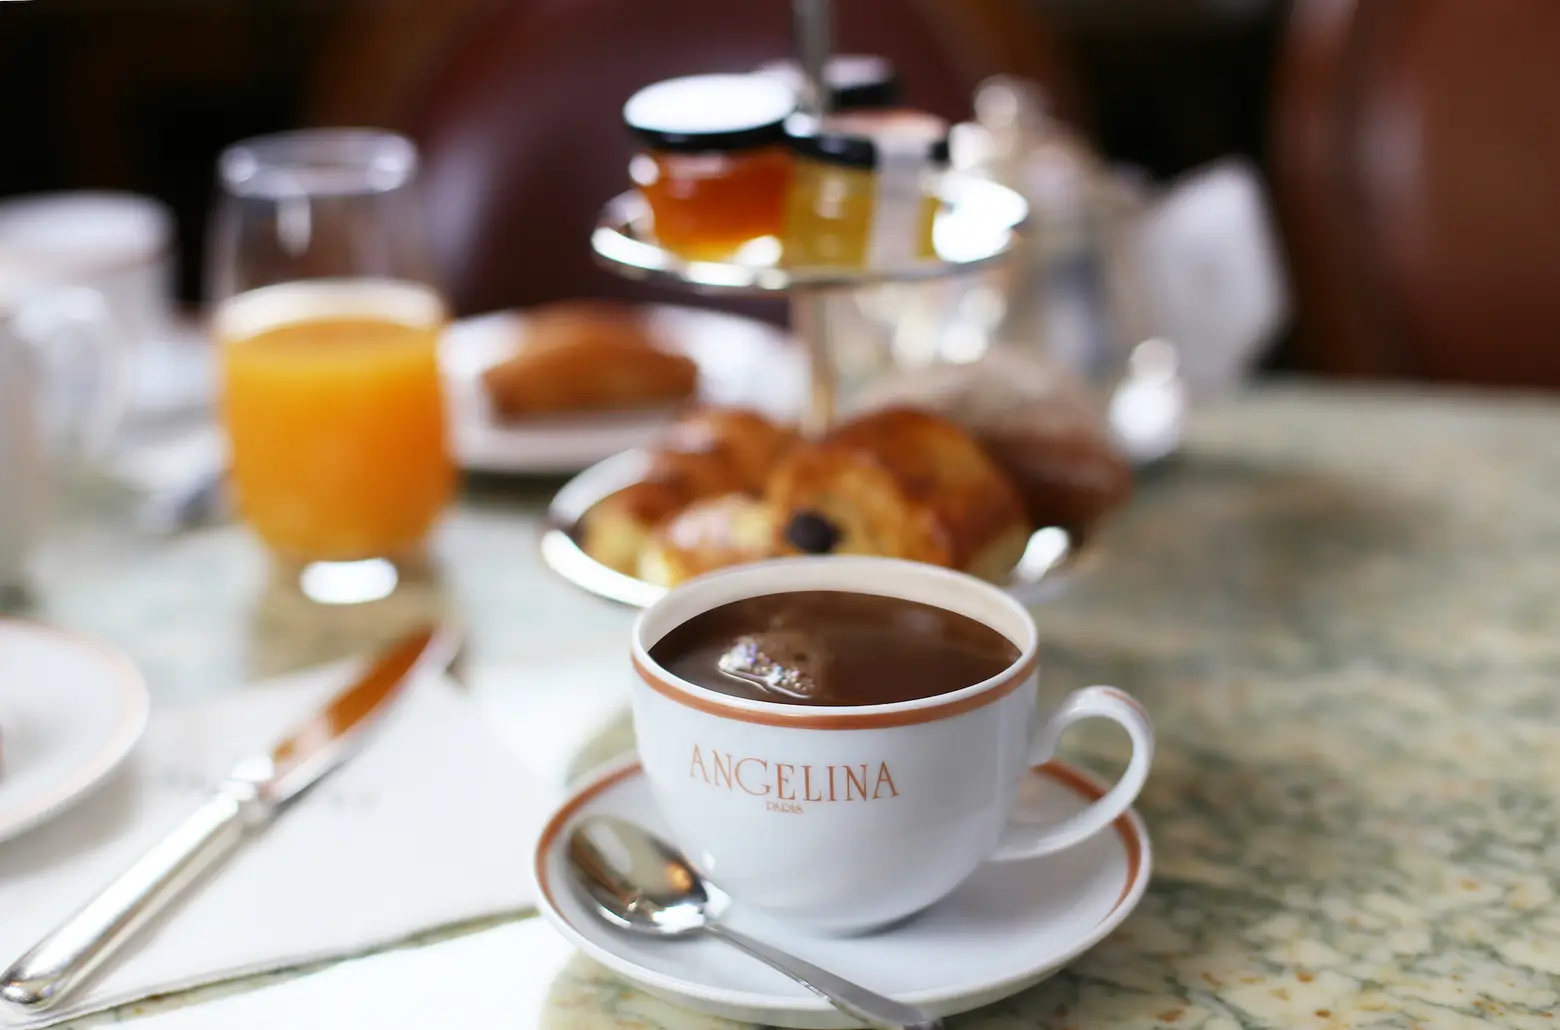 French favorite Angelina Paris opens first U.S. tearoom in NYC